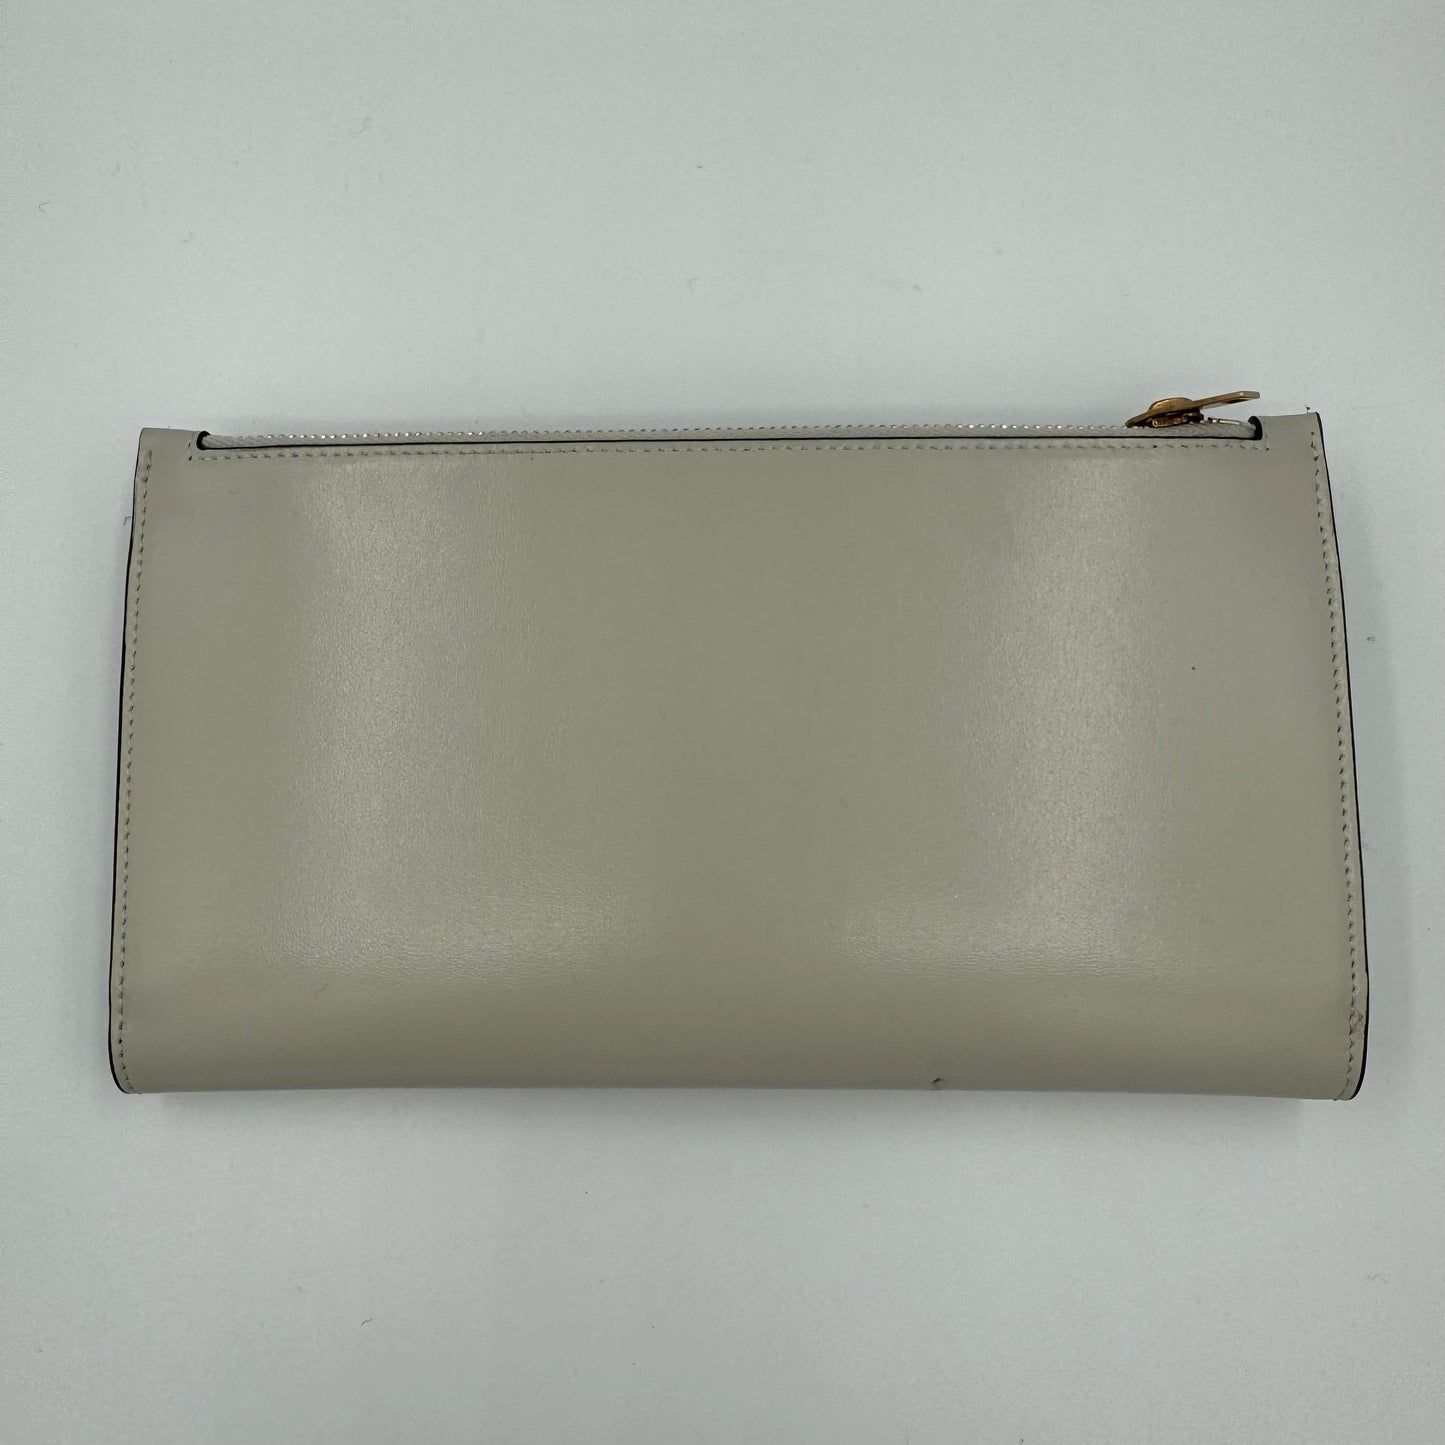 Saint Laurent YSL Women Uptown Chain Wallet in Shiny Smooth Leather